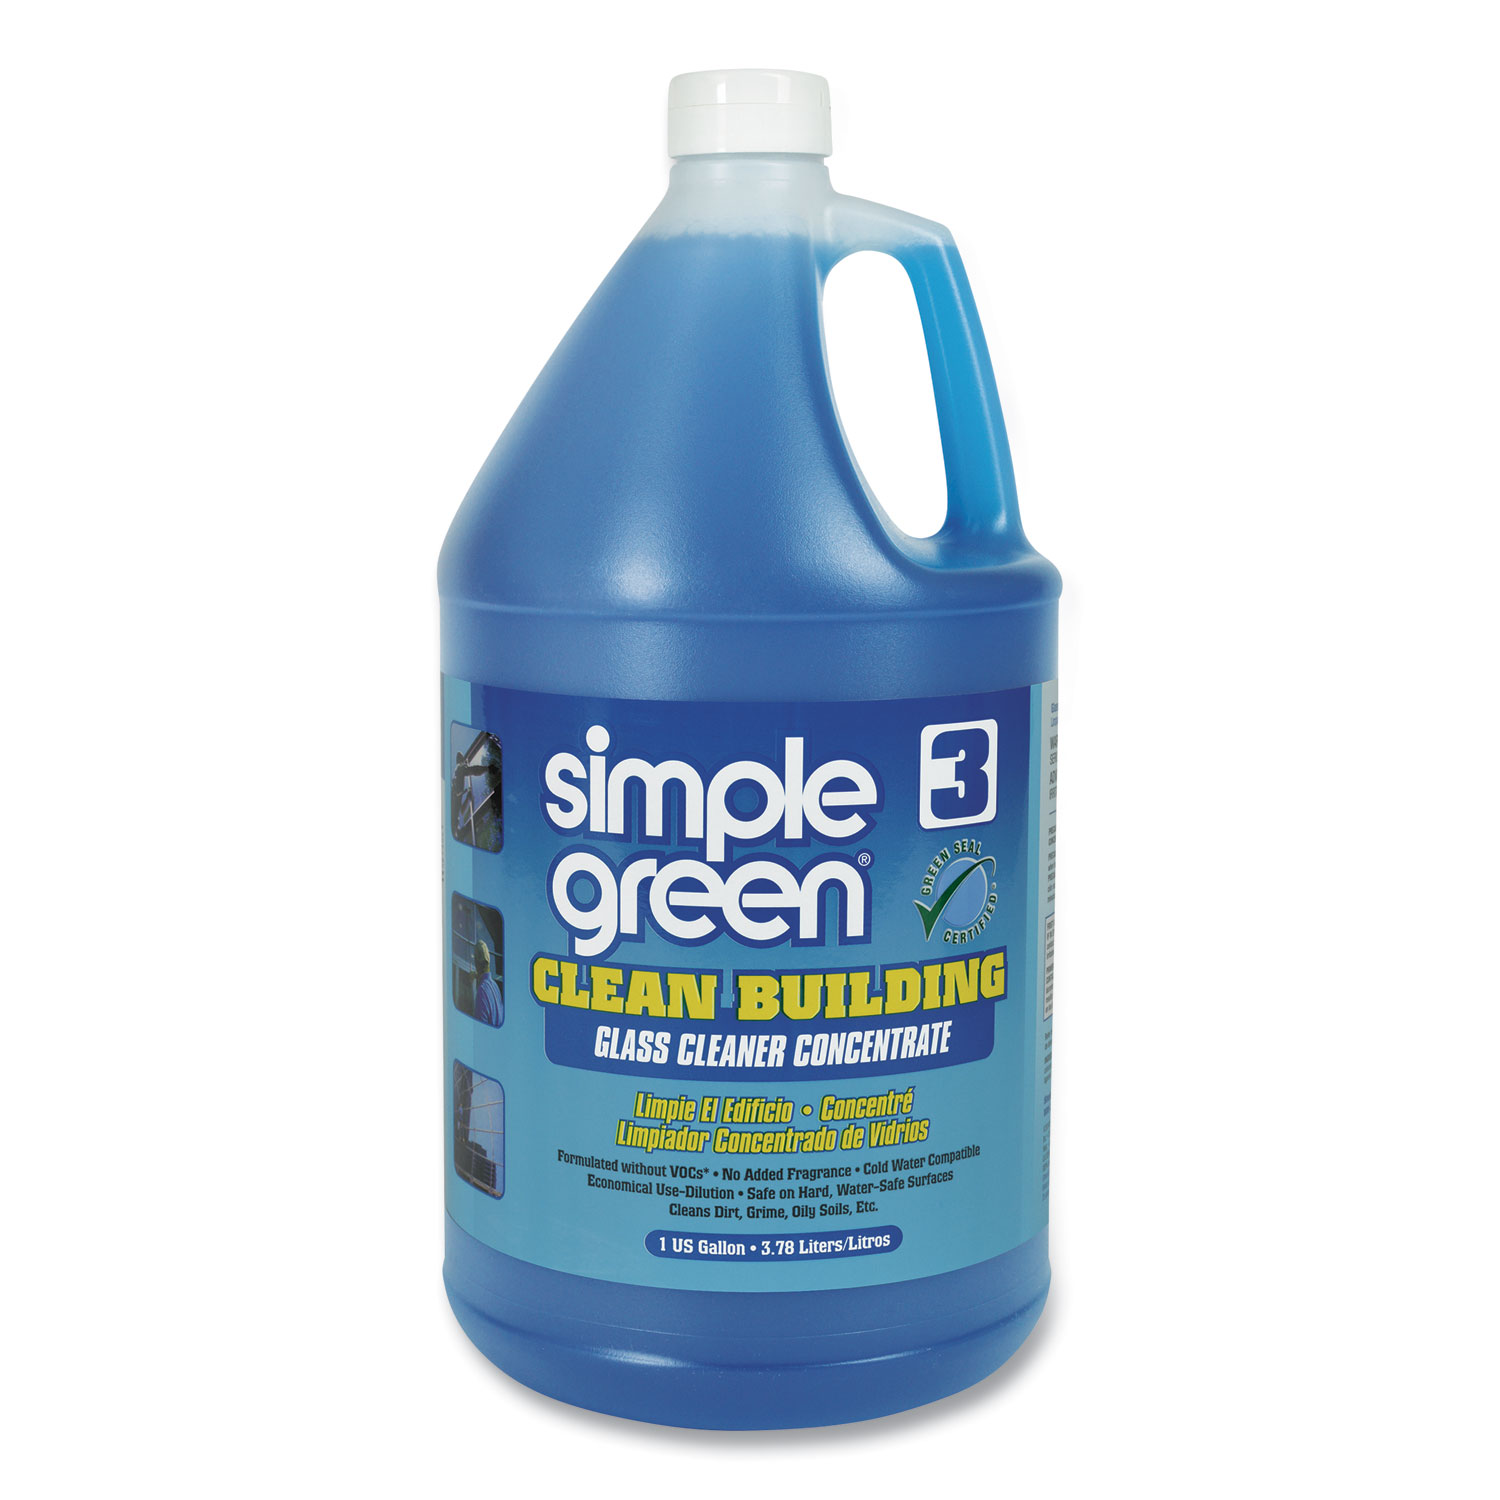  Simple Green 1210000211301 Clean Building Glass Cleaner Concentrate, Unscented, 1gal Bottle (SMP11301) 